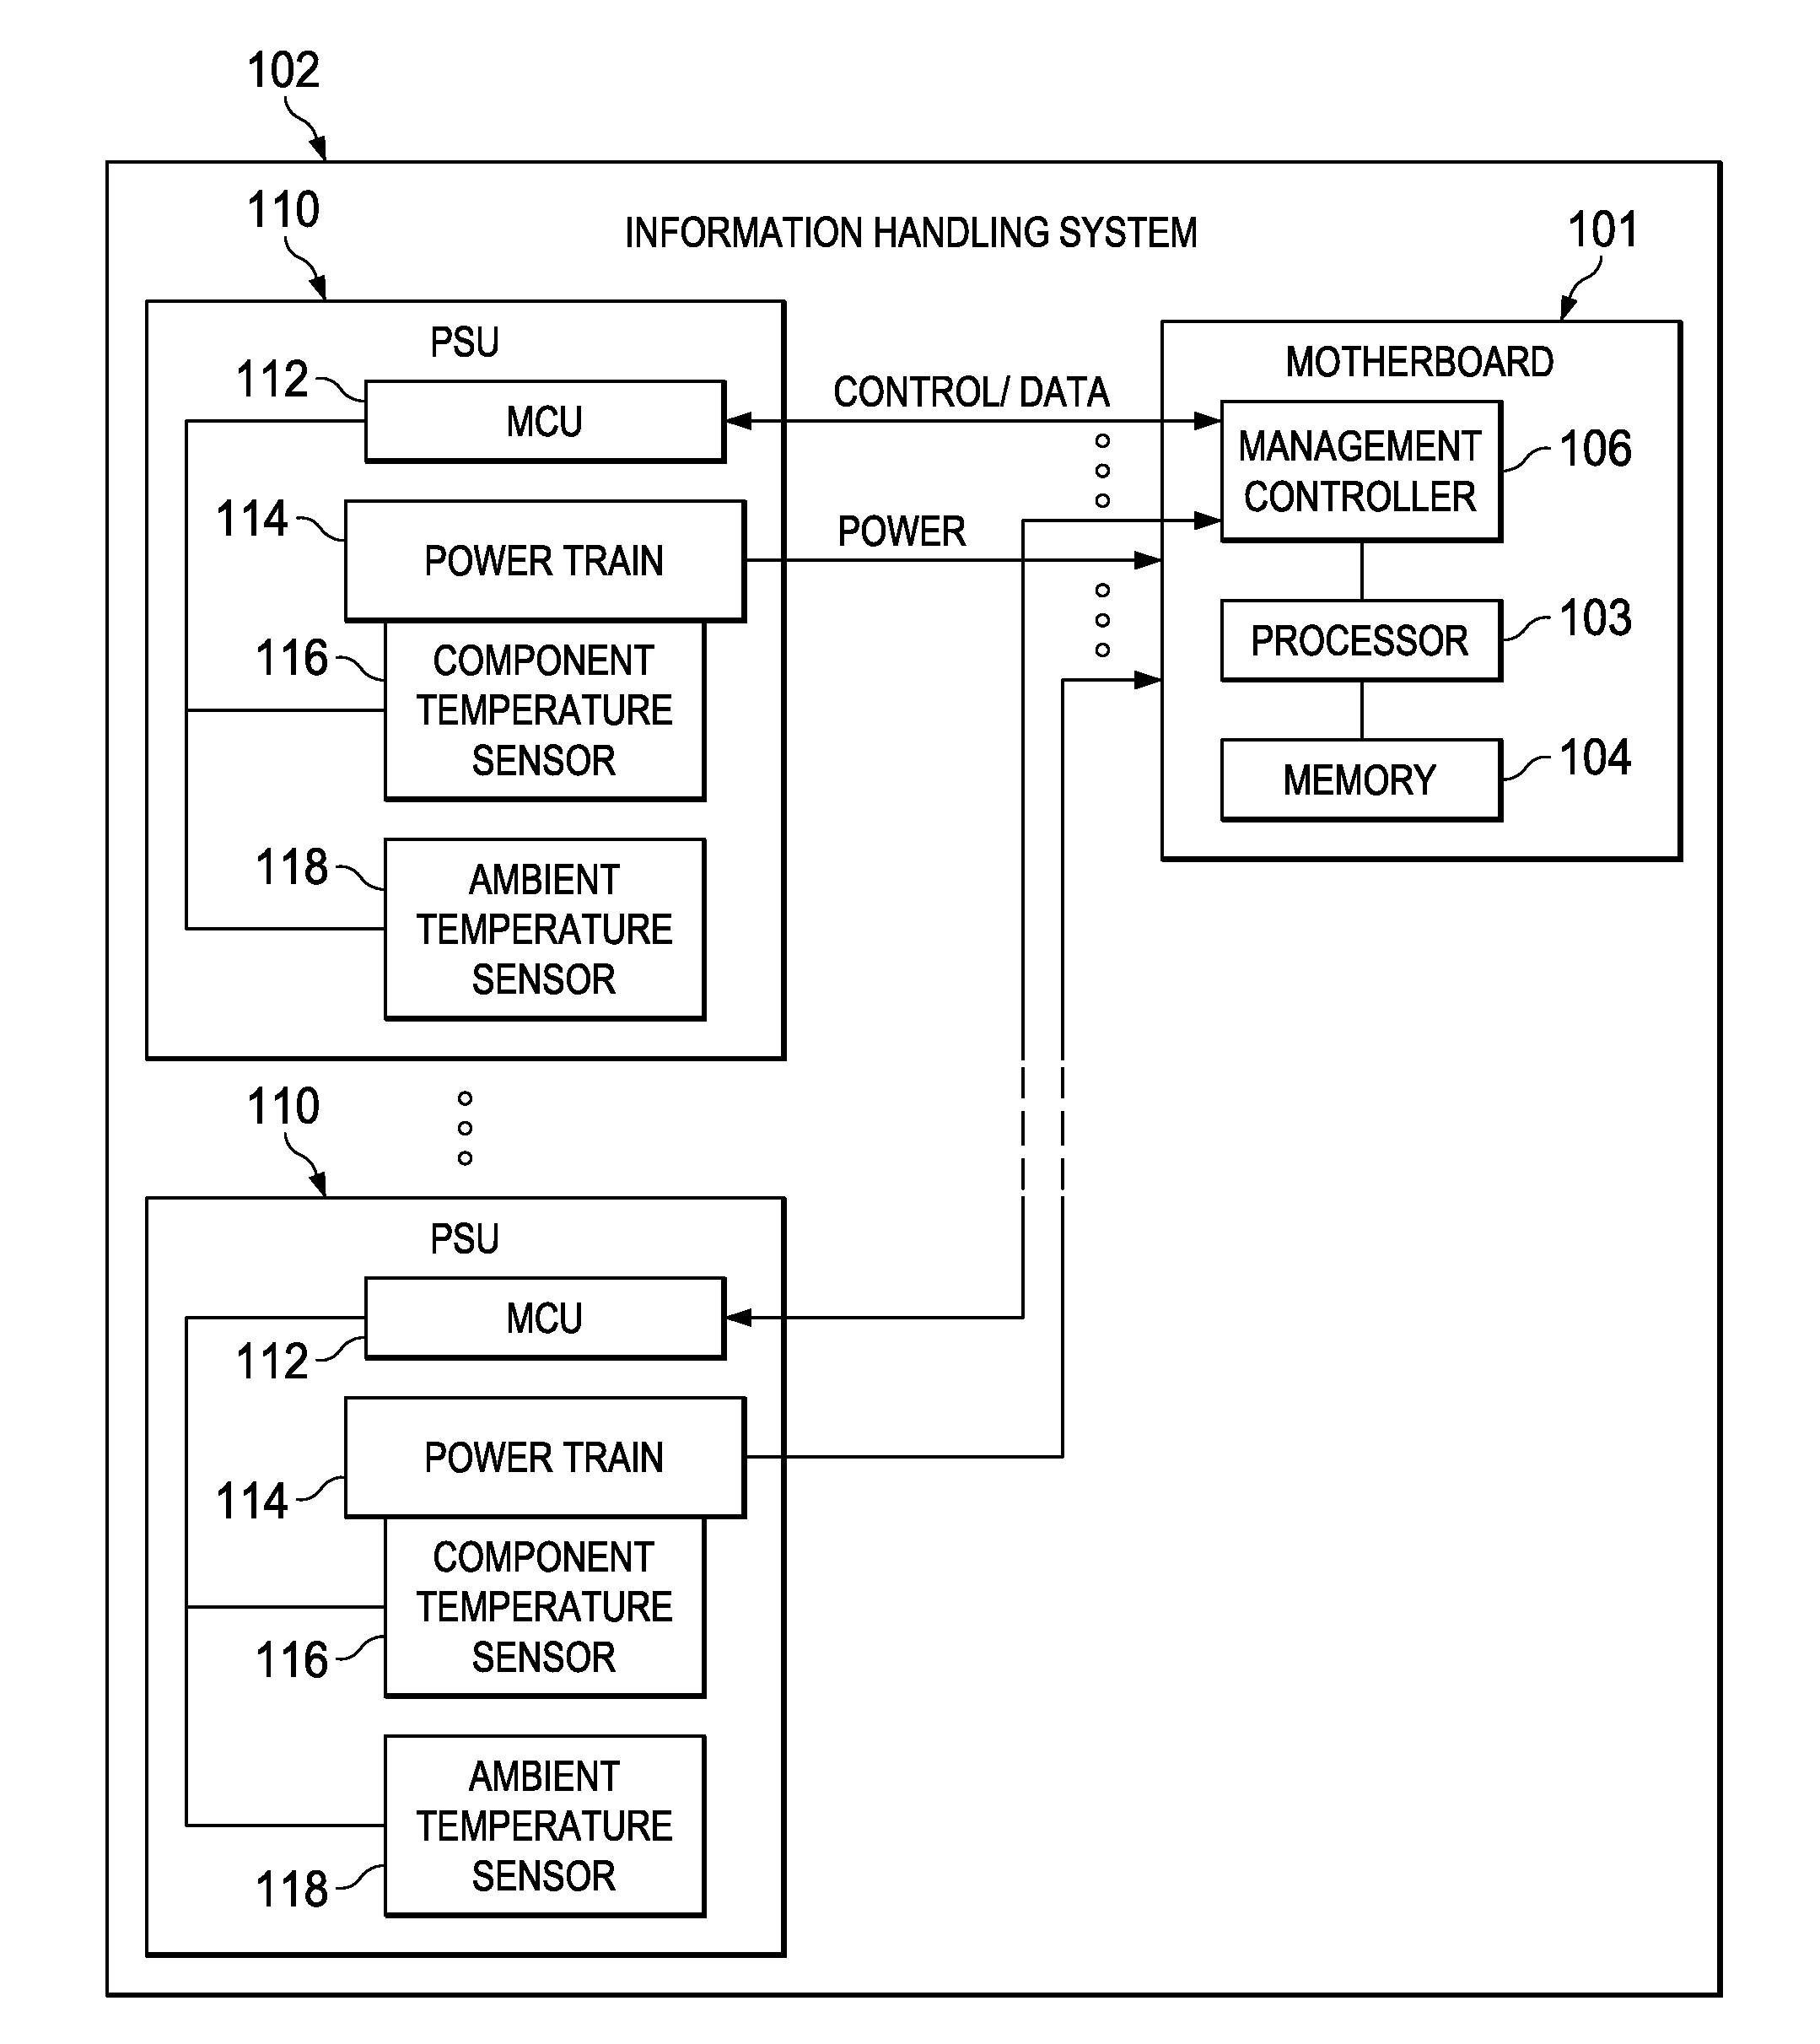 Systems and methods for non-uniform power supply unit load sharing